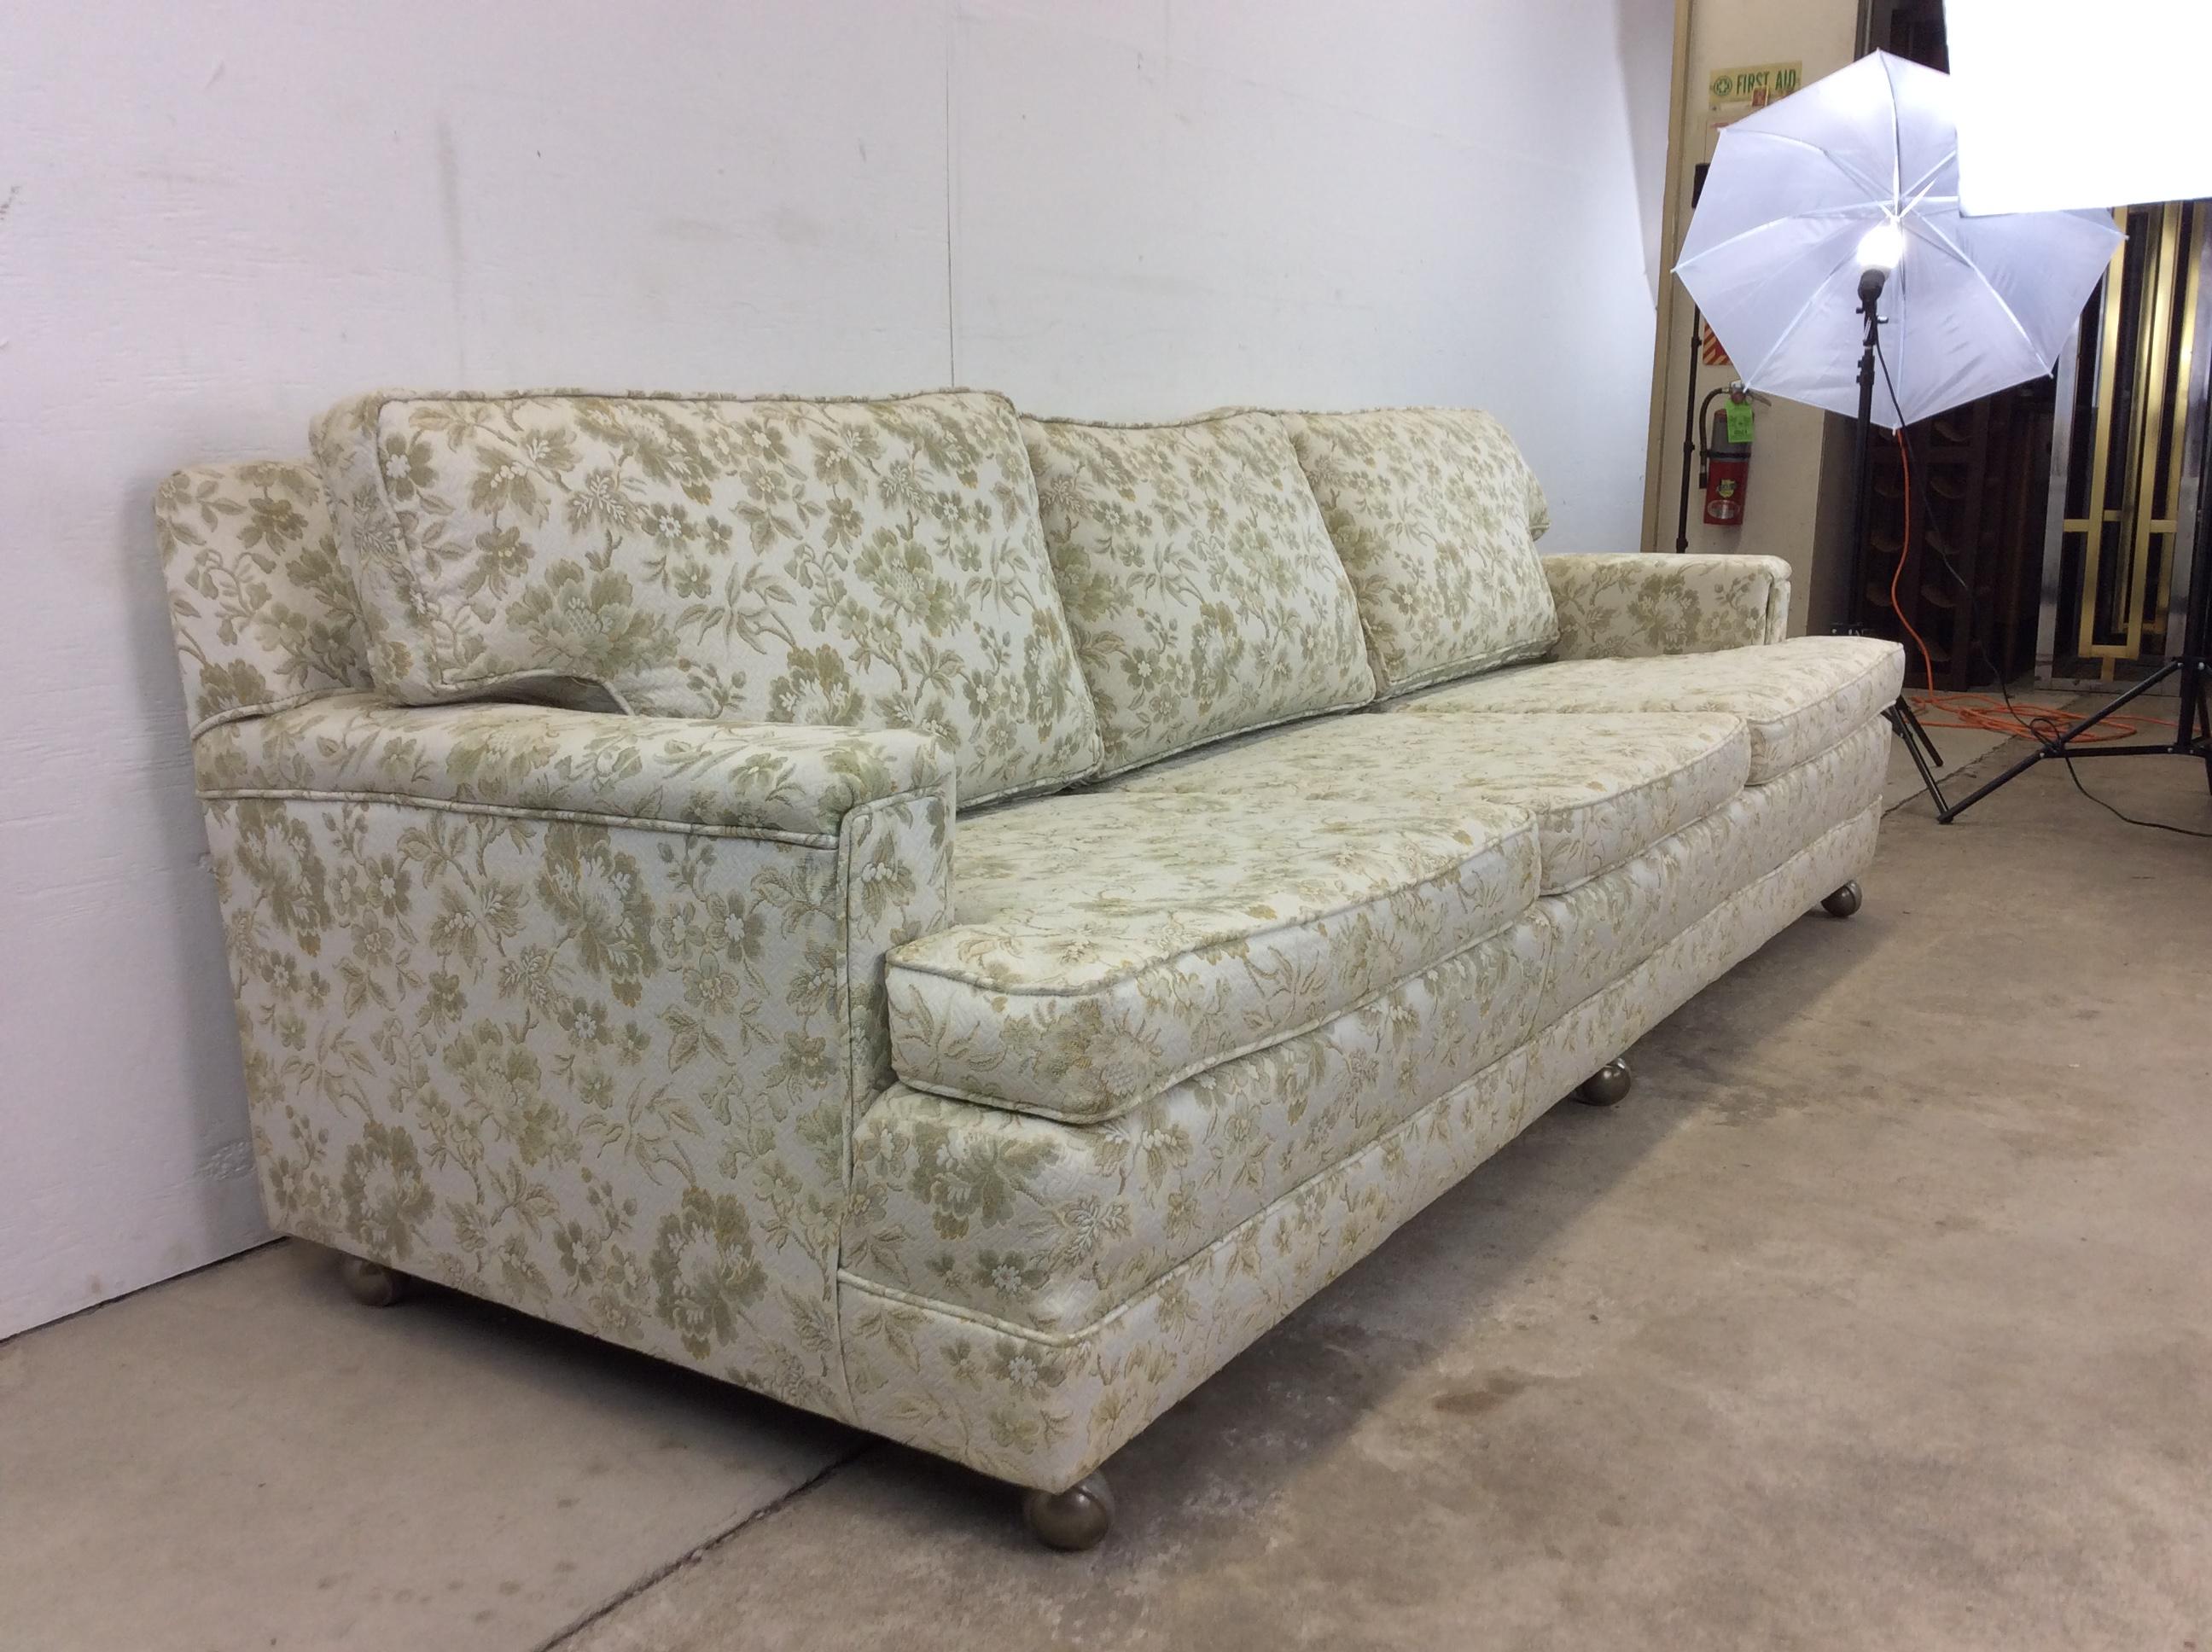 Upholstery Mid Century Modern Floral Patterned 3 Seater Sofa on Wheels For Sale